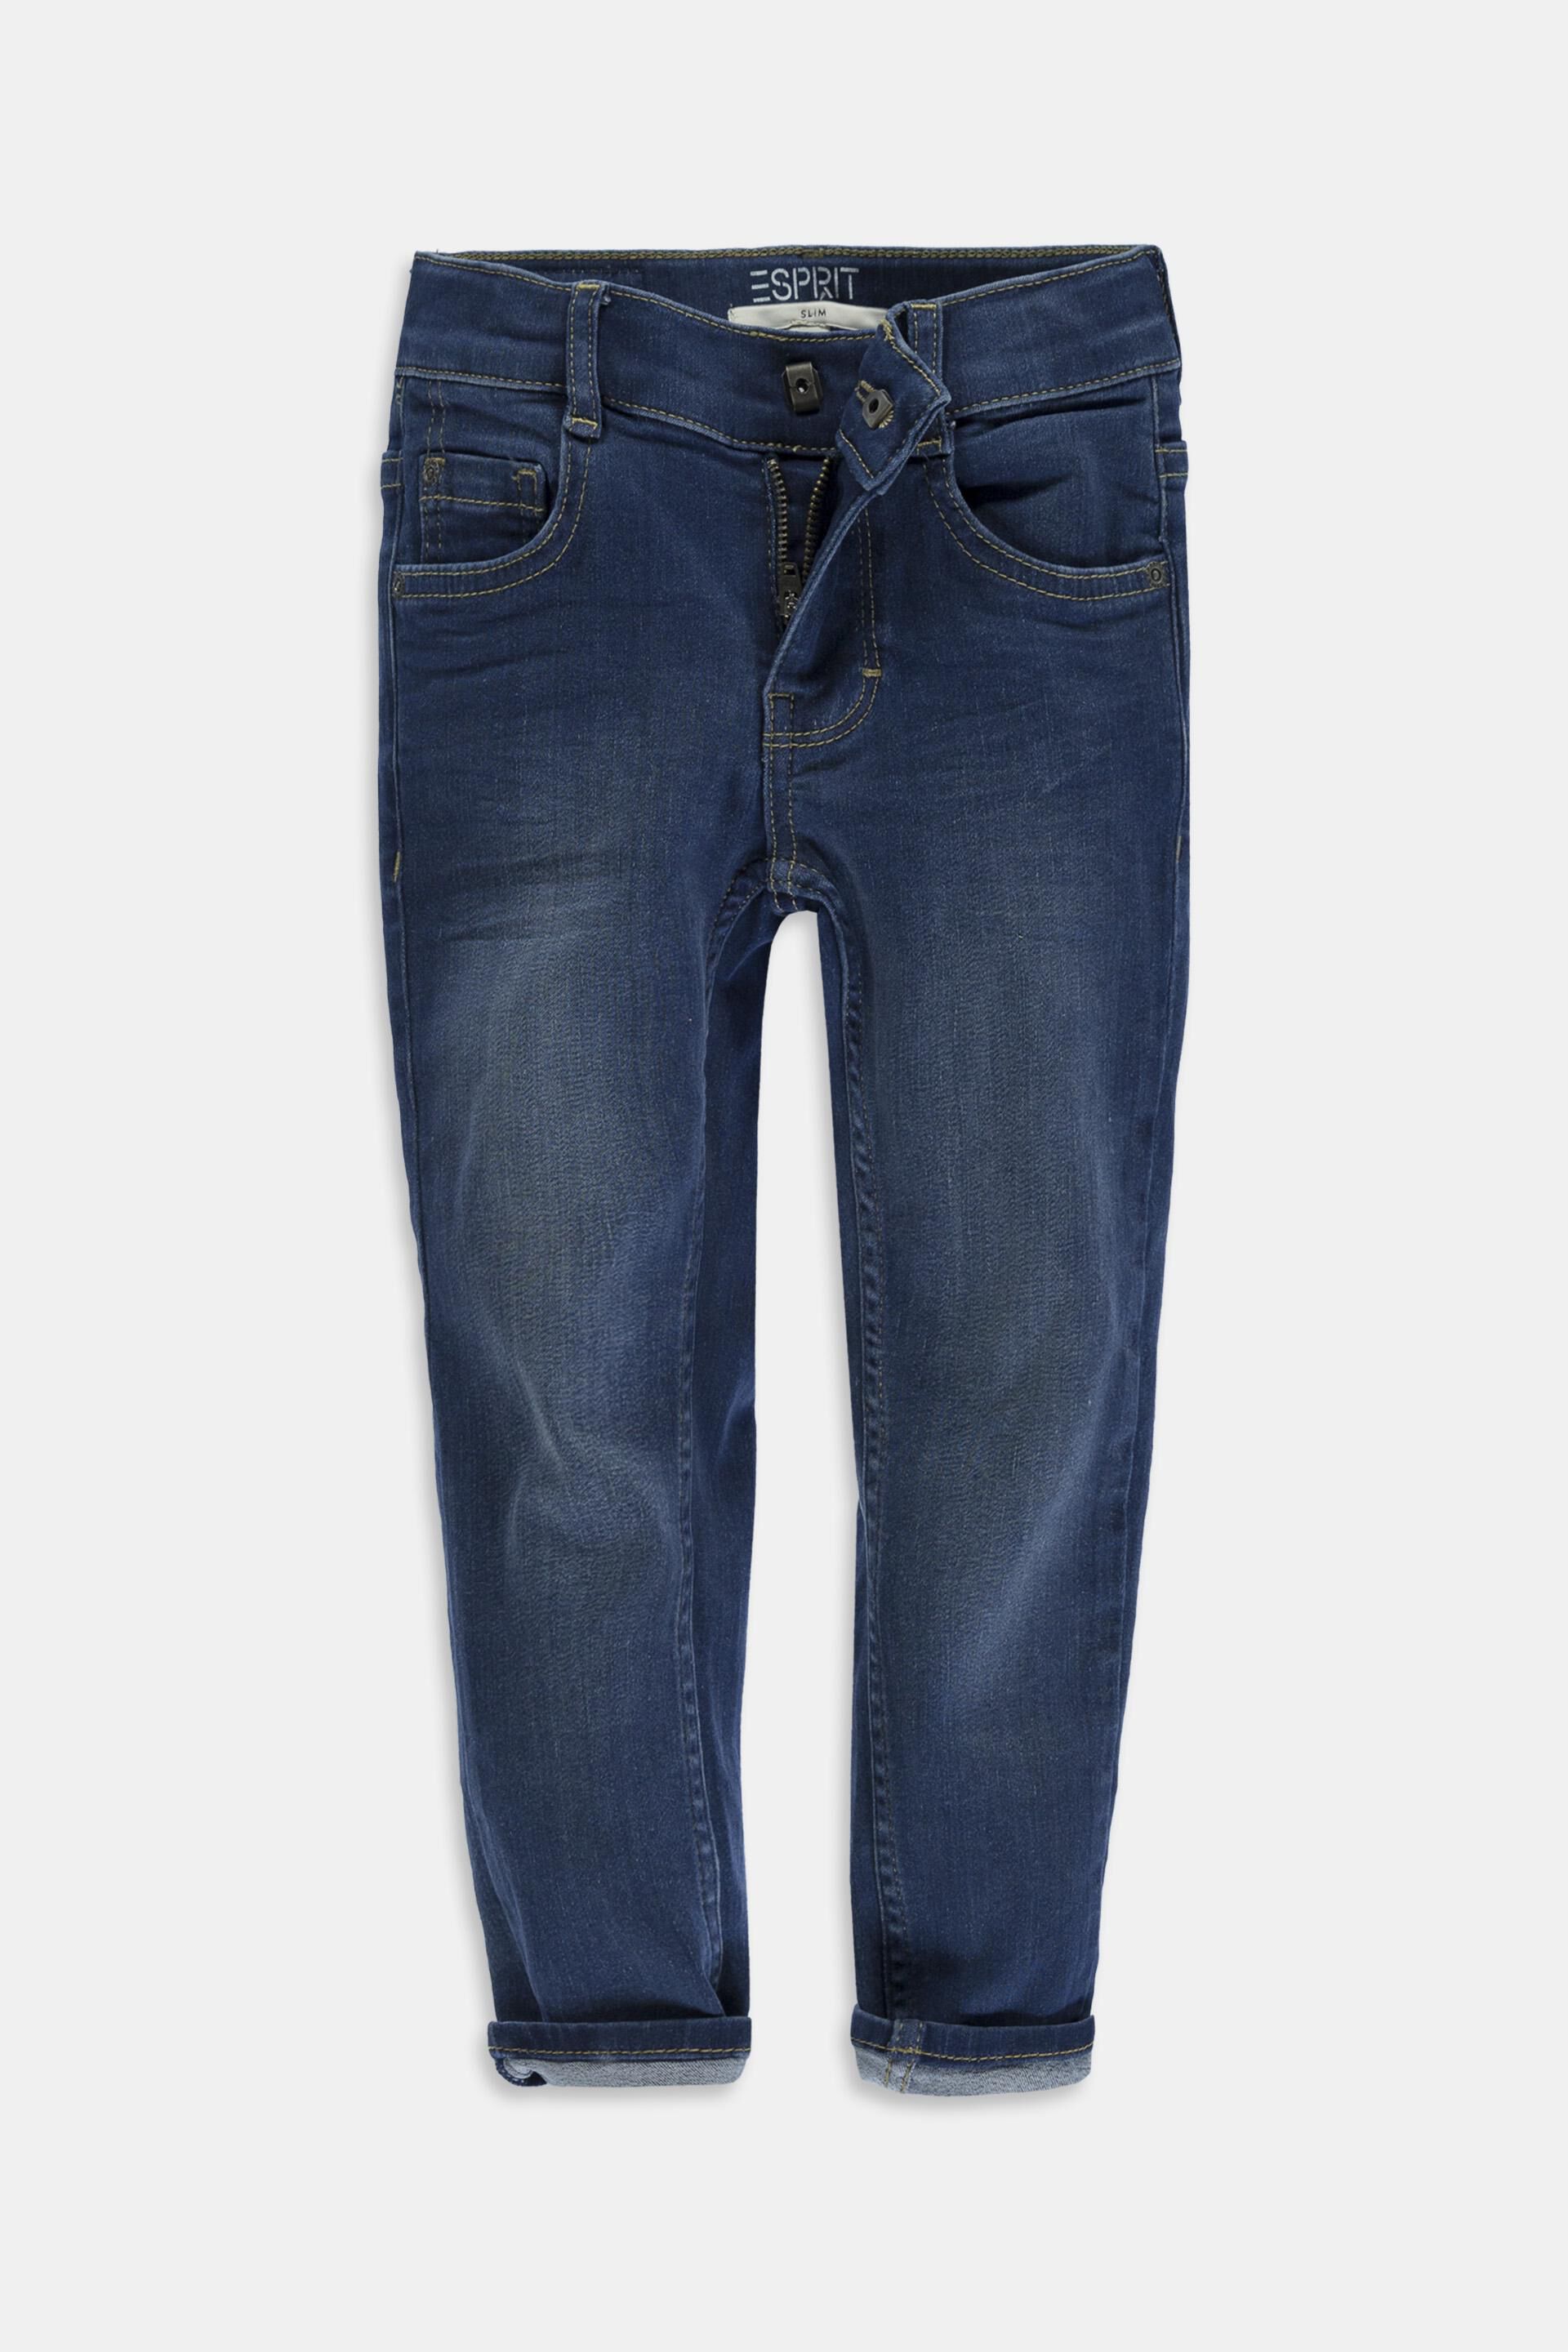 Esprit an with in waistband different widths jeans available Stretch adjustable